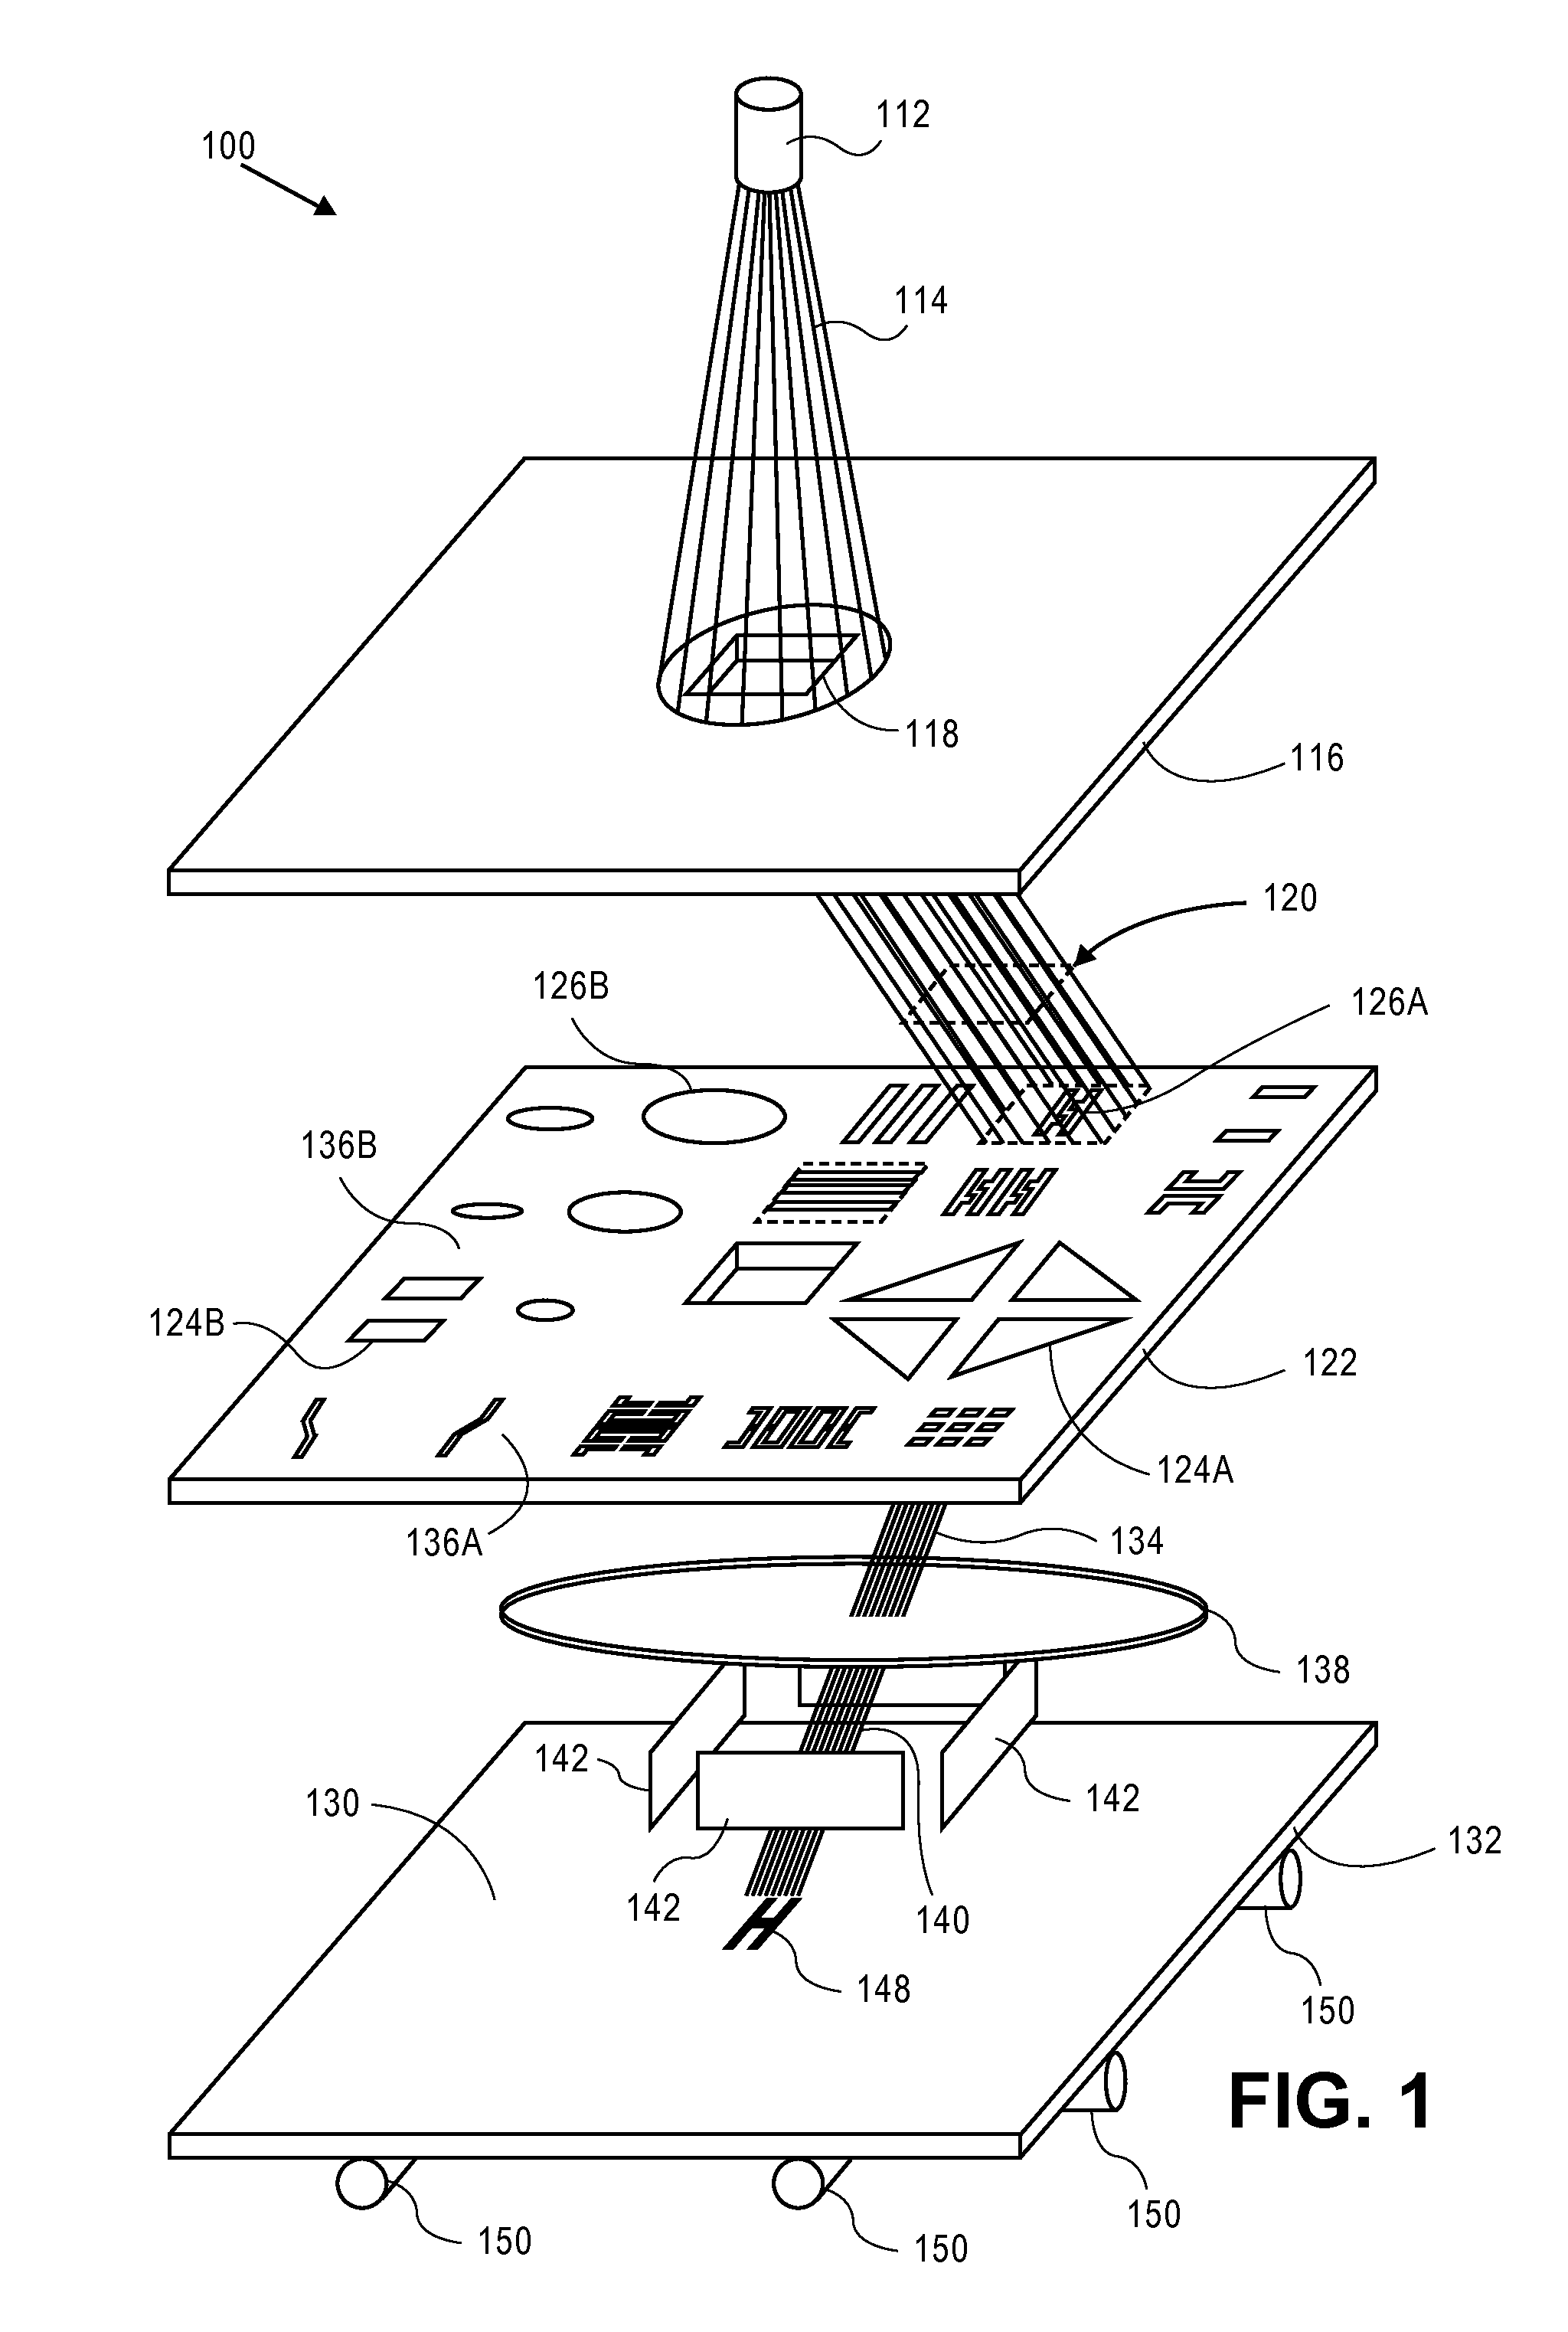 Method for Fracturing and Forming a Pattern Using Curvilinear Characters with Charged Particle Beam Lithography